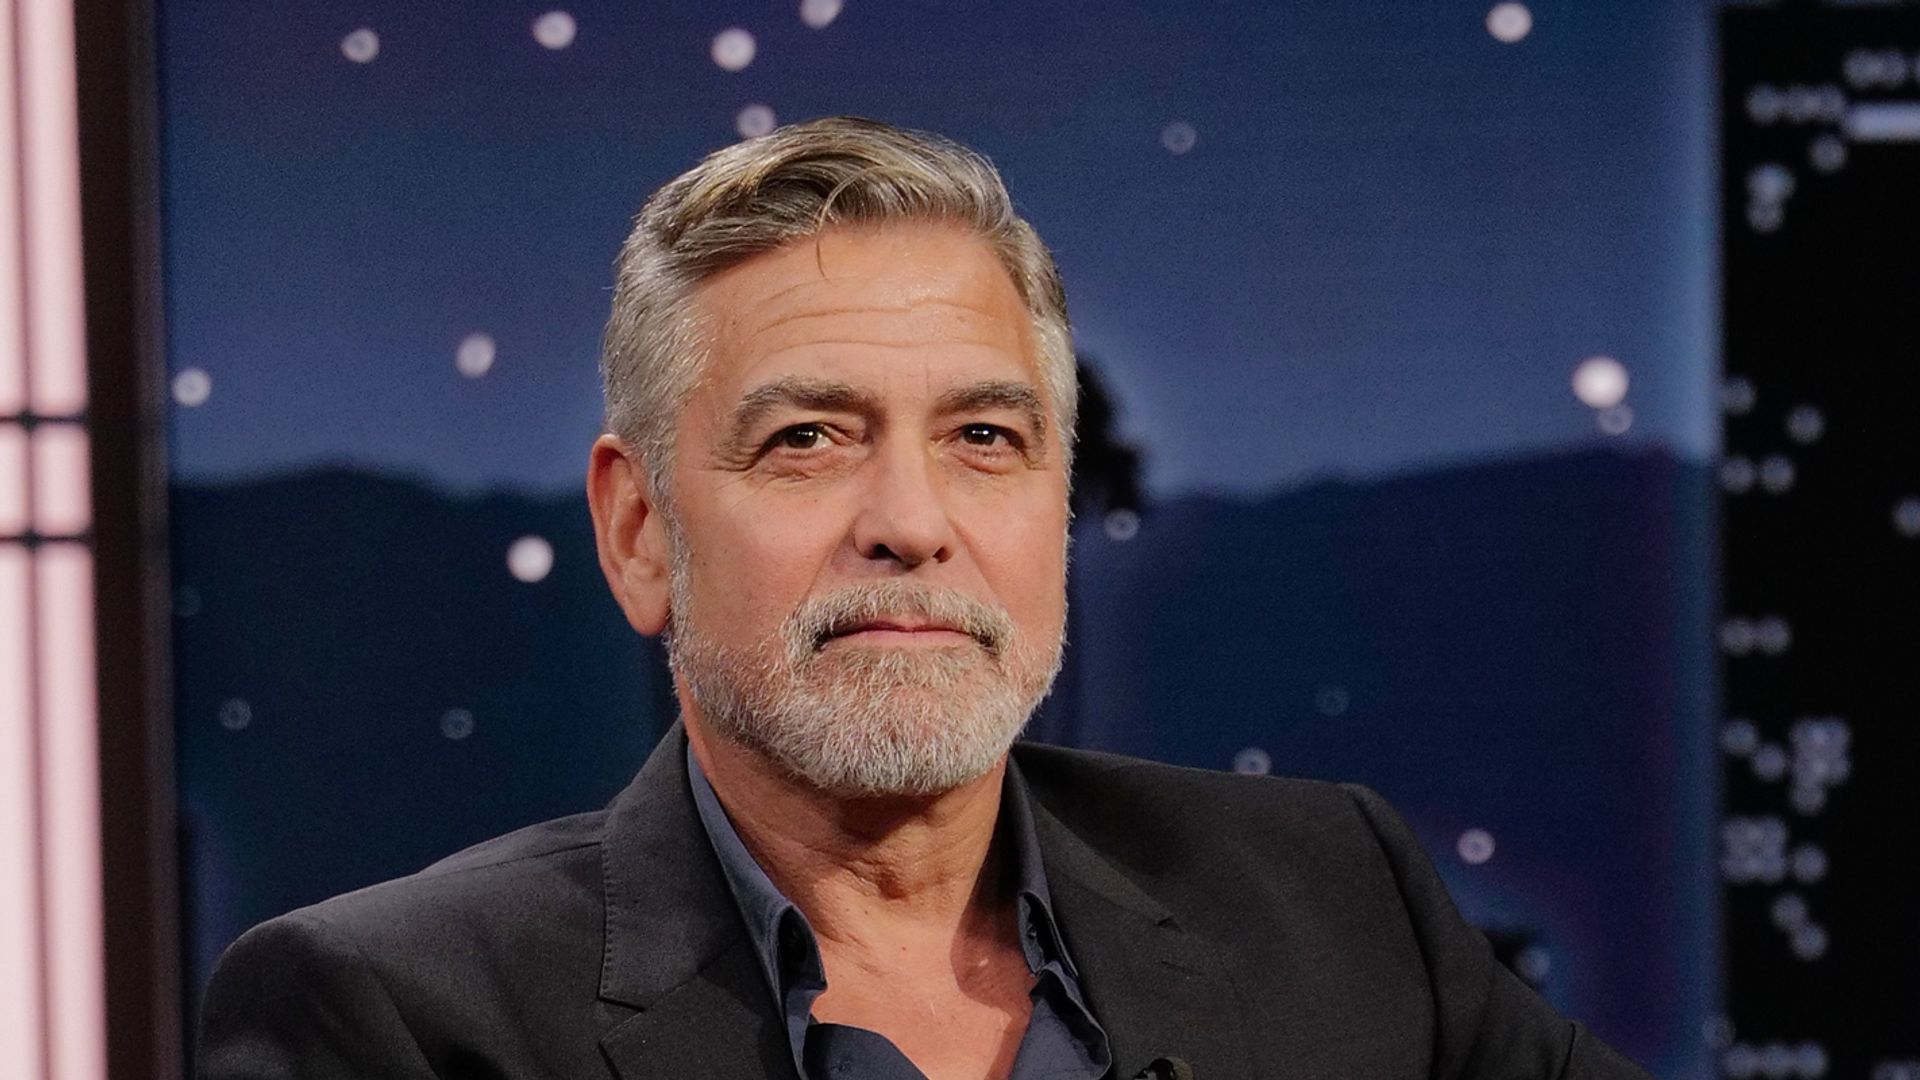 George Clooney's major news has very personal ties to his family — all we know about his Broadway debut